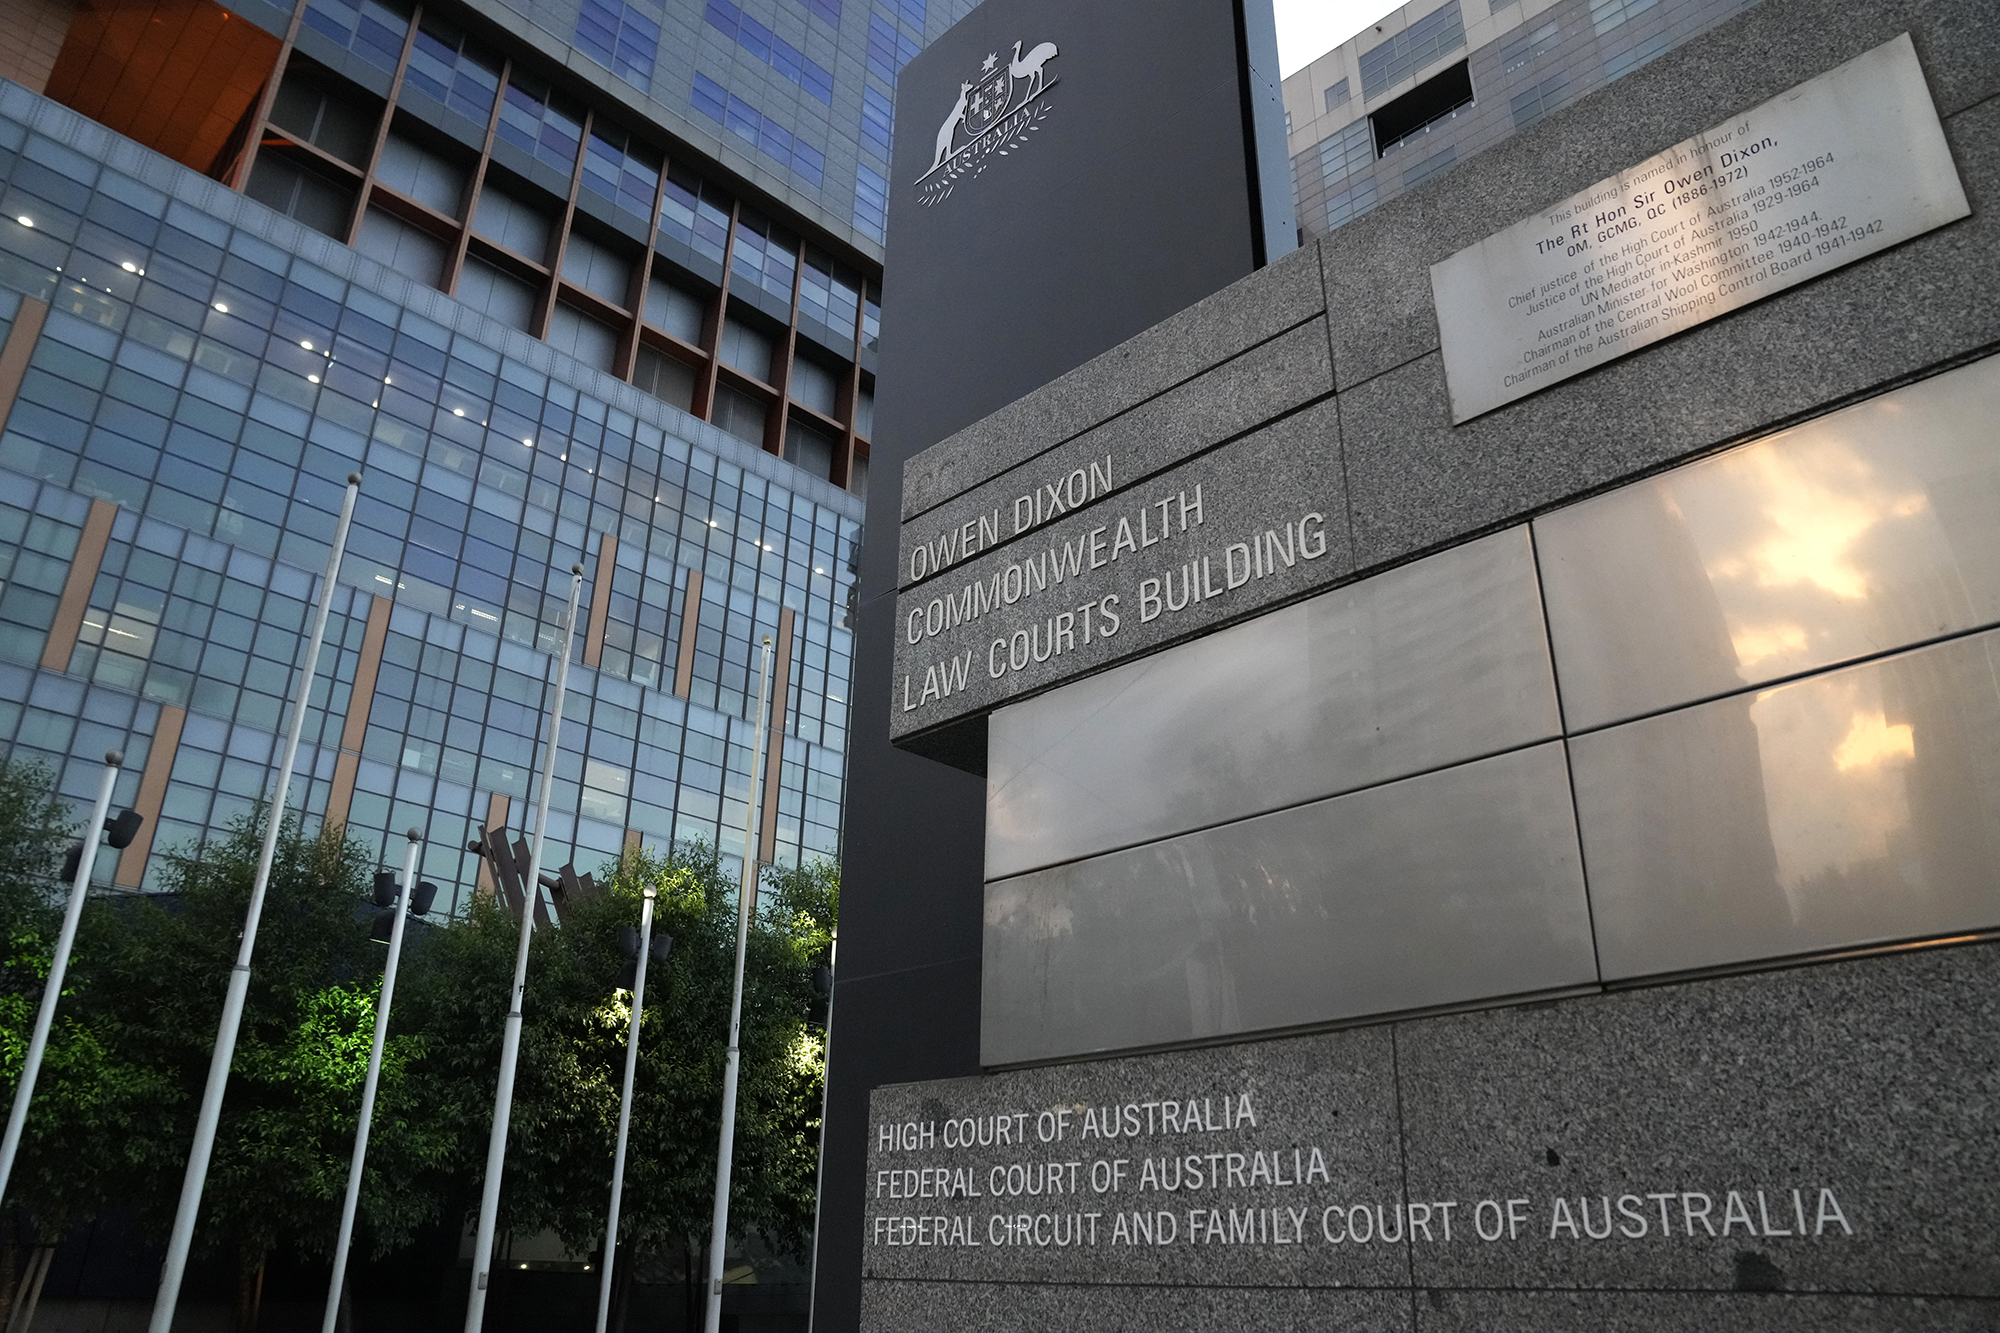 Owen Dixon Commonwealth Law Courts building, where the hearing of Serbian tennis player Novak Djokovic is held at the Federal Circuit and Family Court of Australia, is seen in Melbourne, Australia, Friday, January 14.